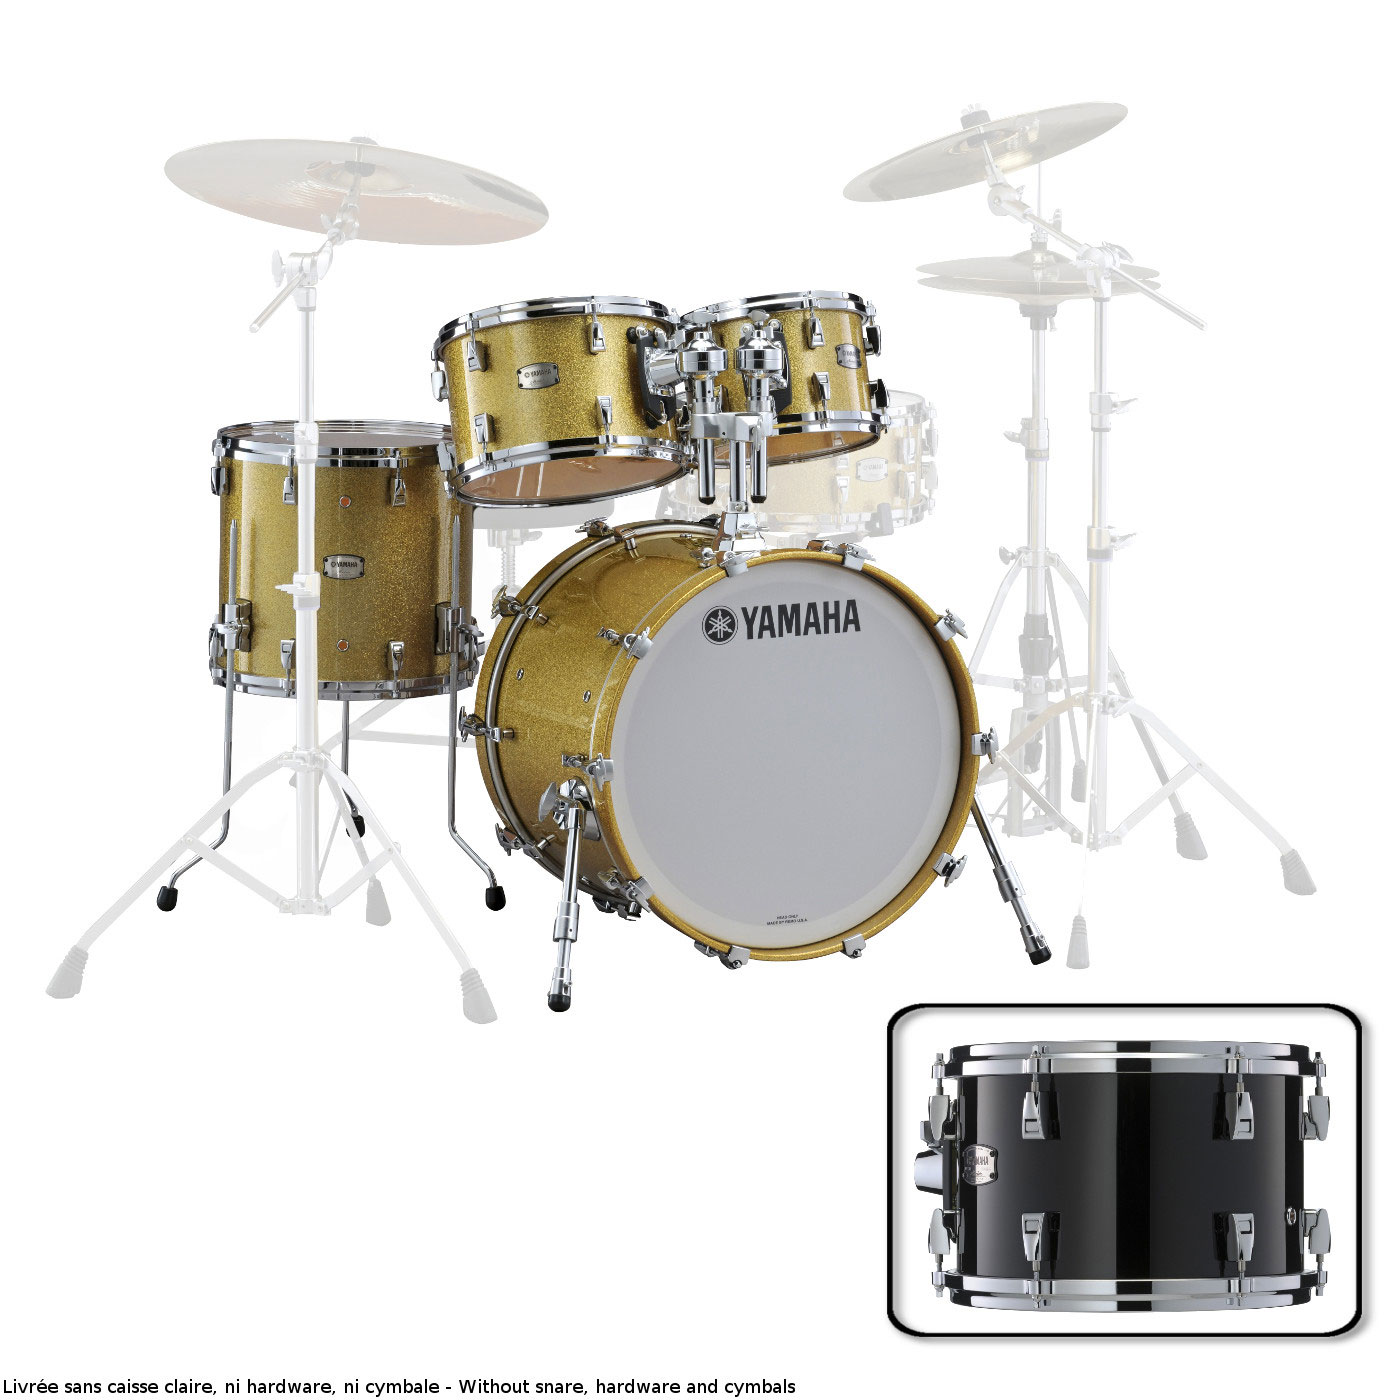 ABSOLUTE HYBRID MAPLE FUSION 20 SOLID BLACK